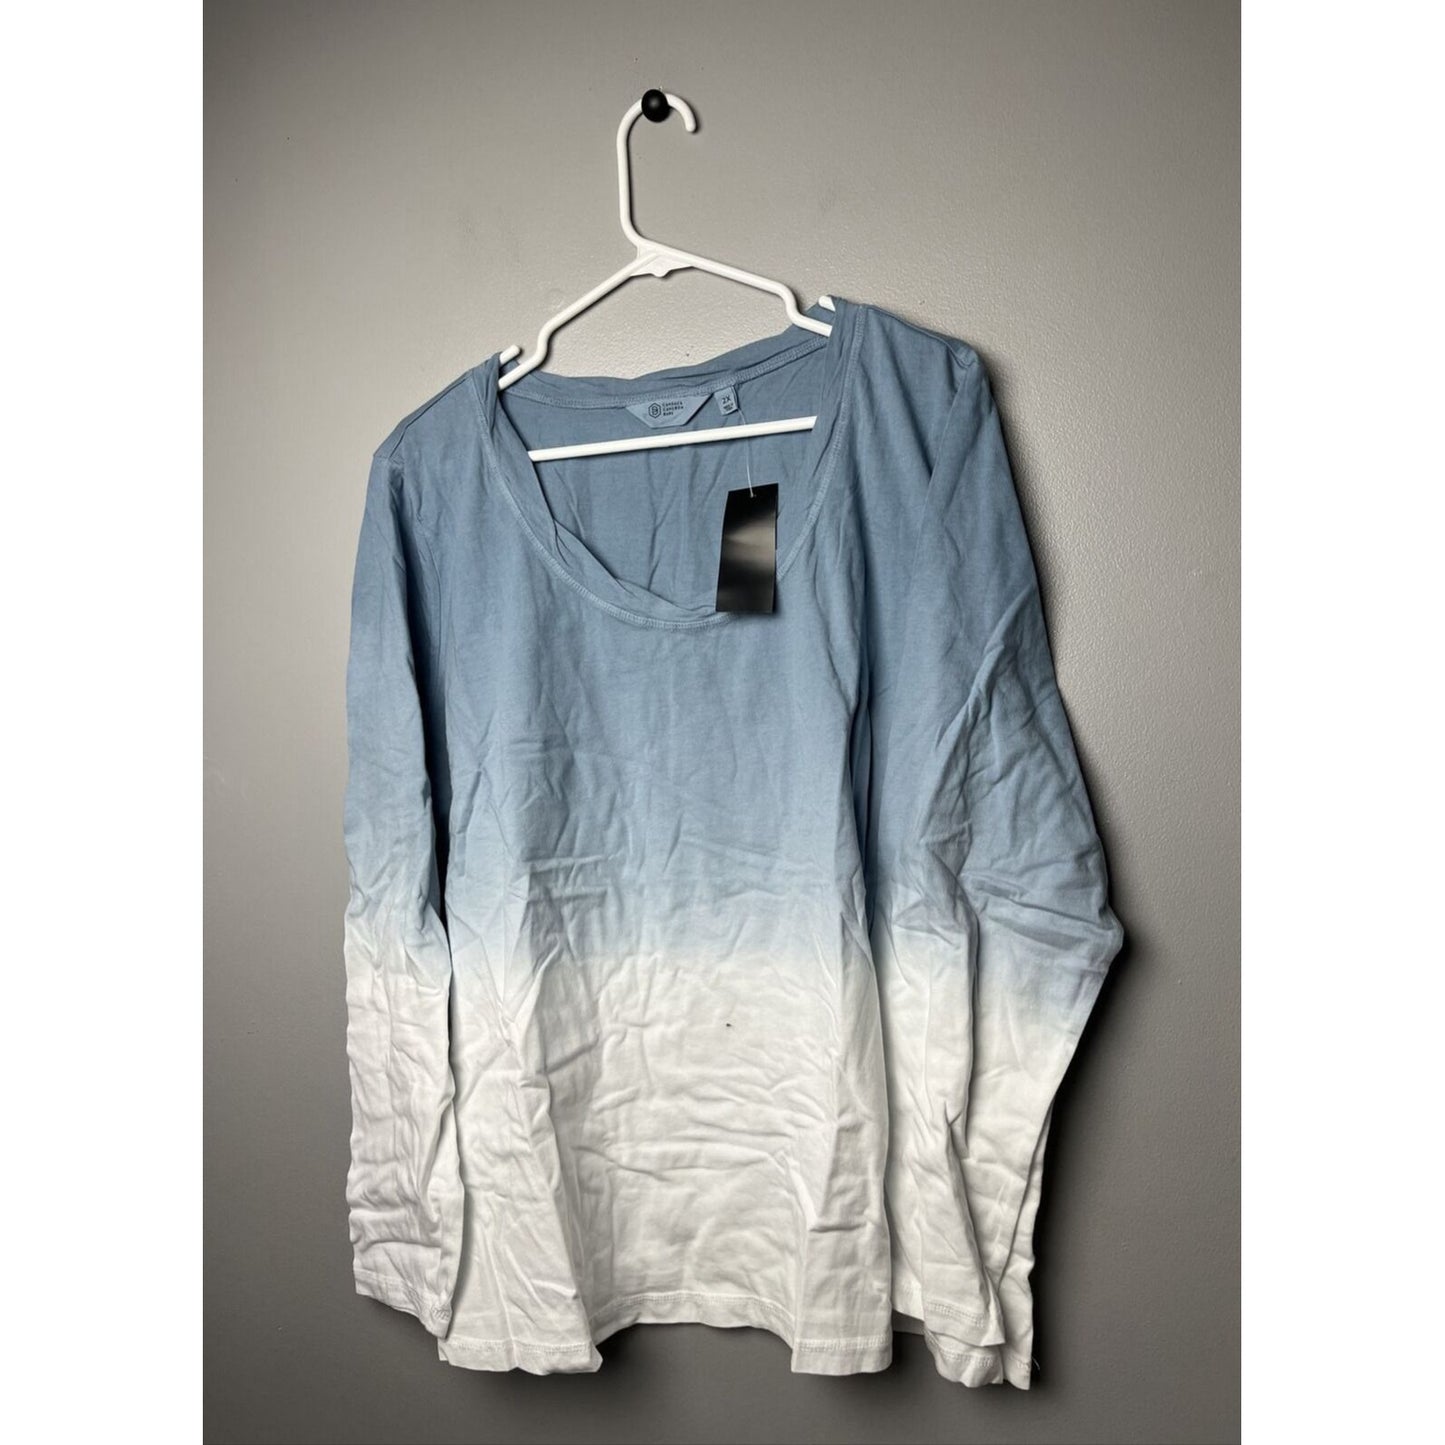 Candace Cameron Bure The Ocean Dipped Long-Sleeve Tee Top Blue 2X Size